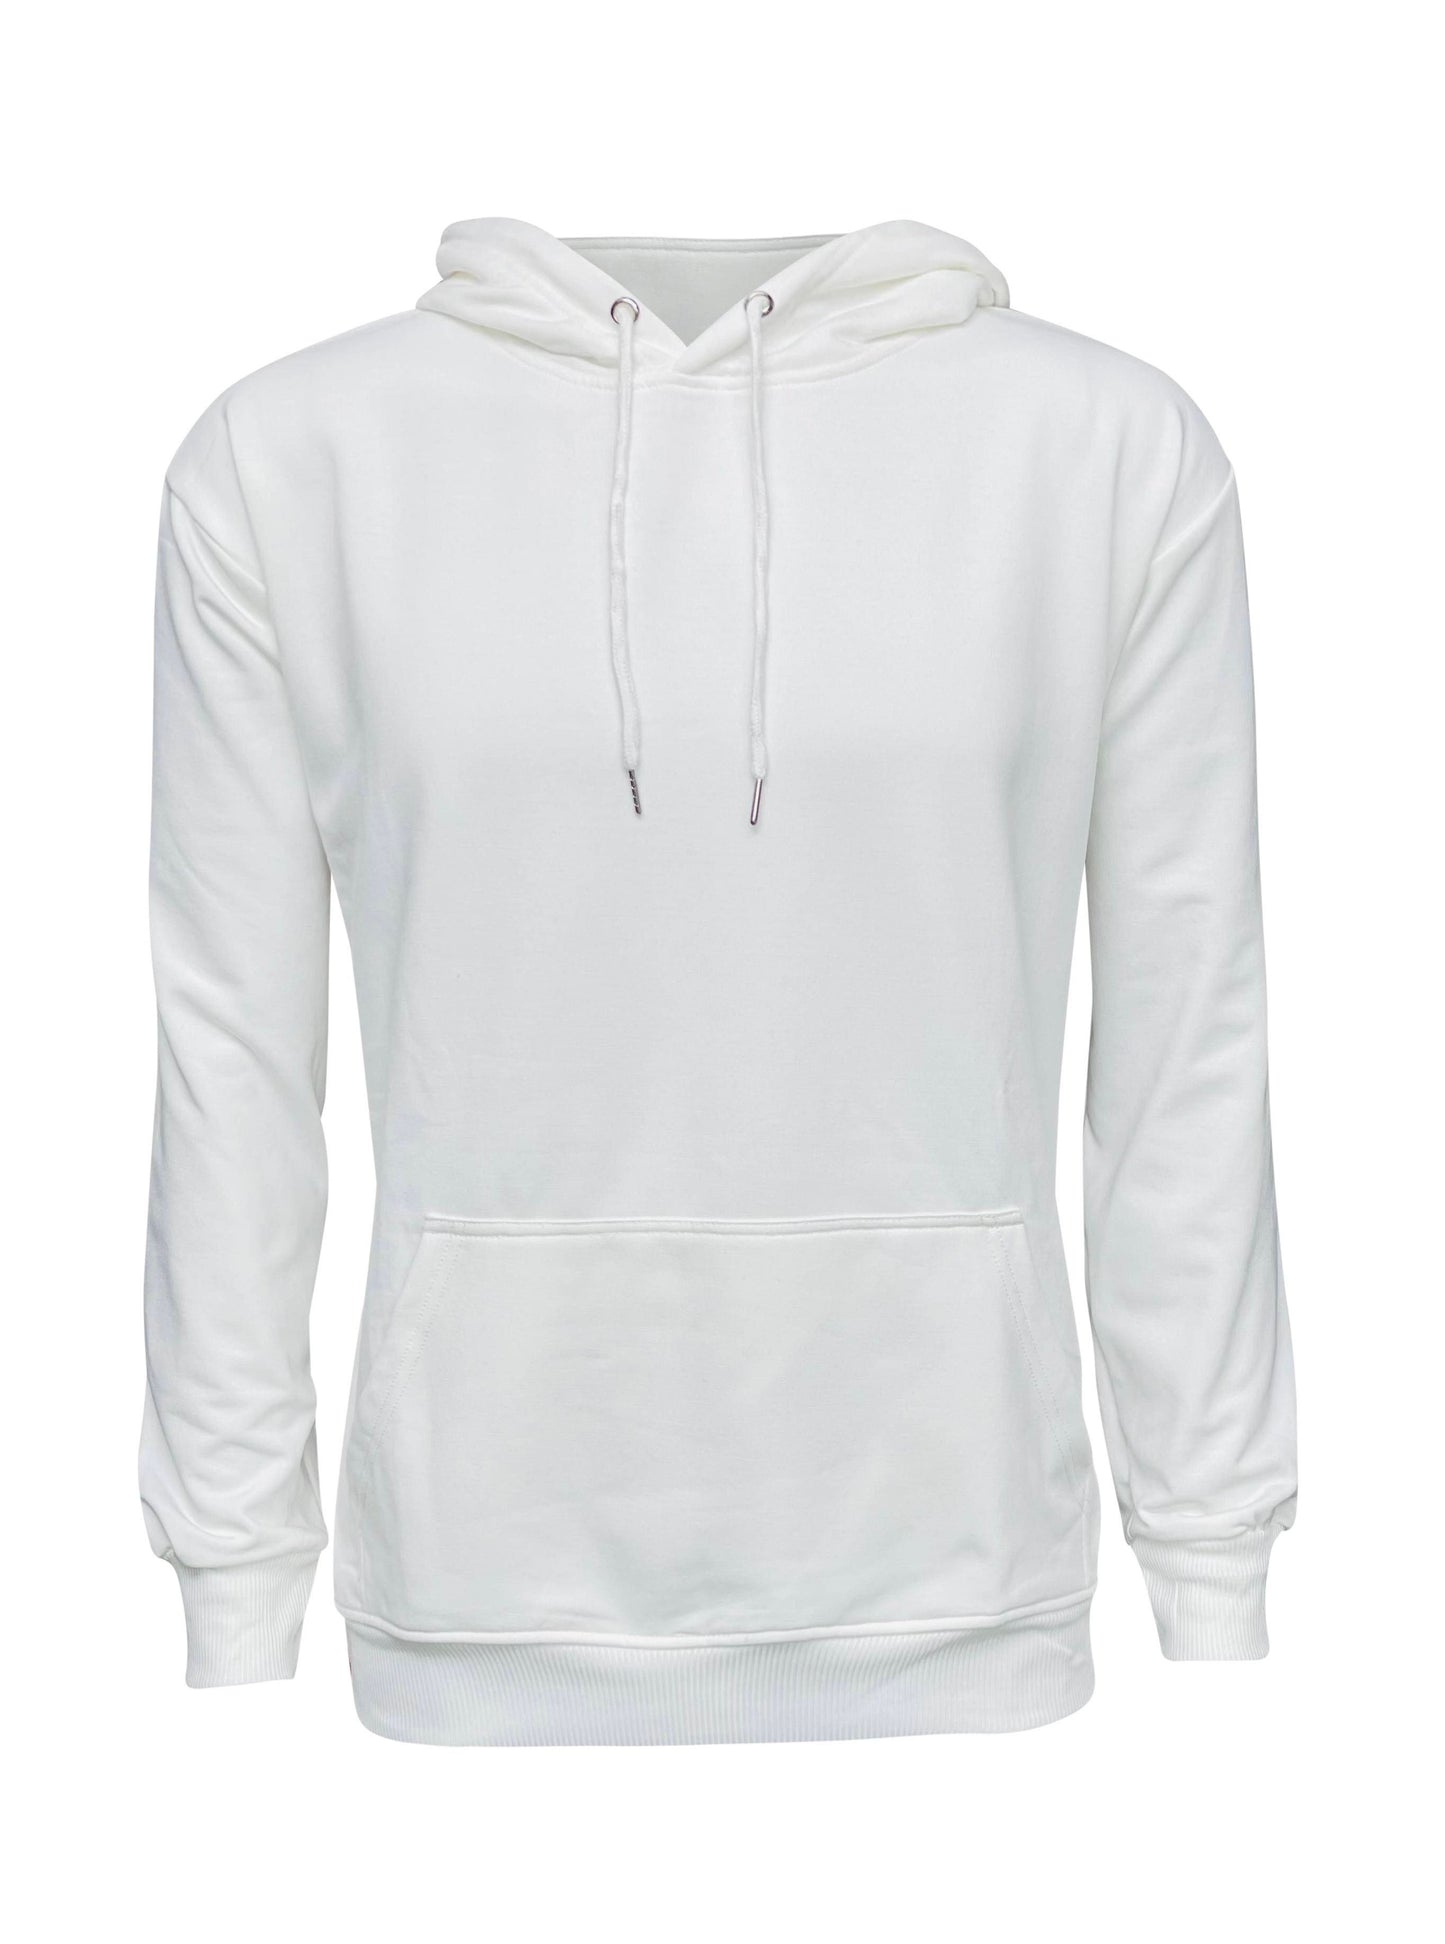 Adult Unisex Faux Bleached Hoodies- Perfect for Sublimation